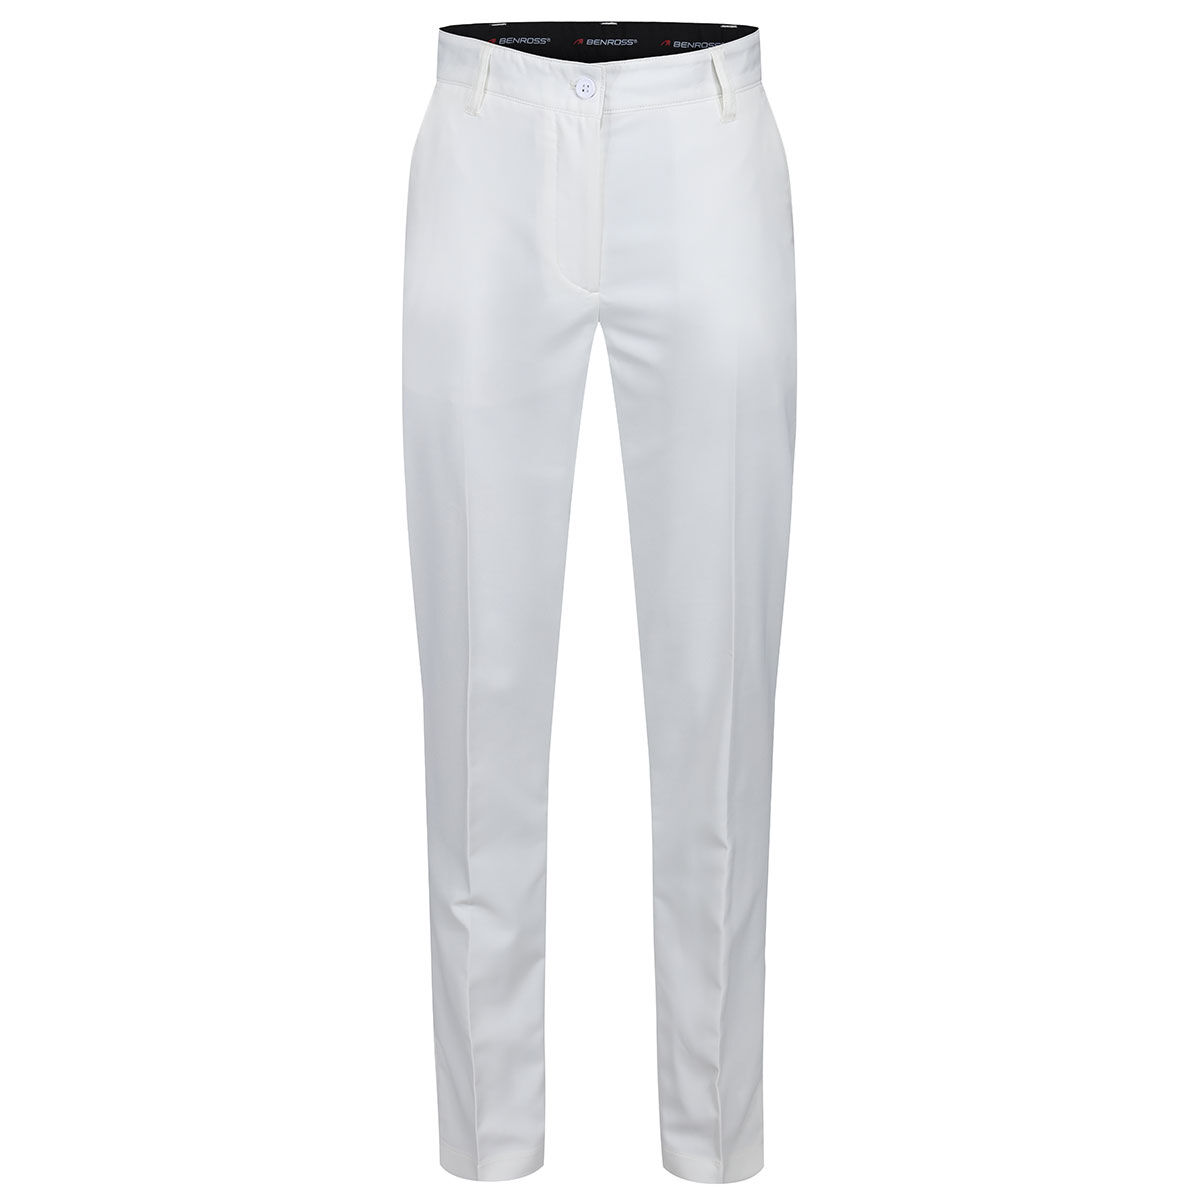 Benross Womens White Core Stretch Golf Trousers, Size: 8 | American Golf von Benross